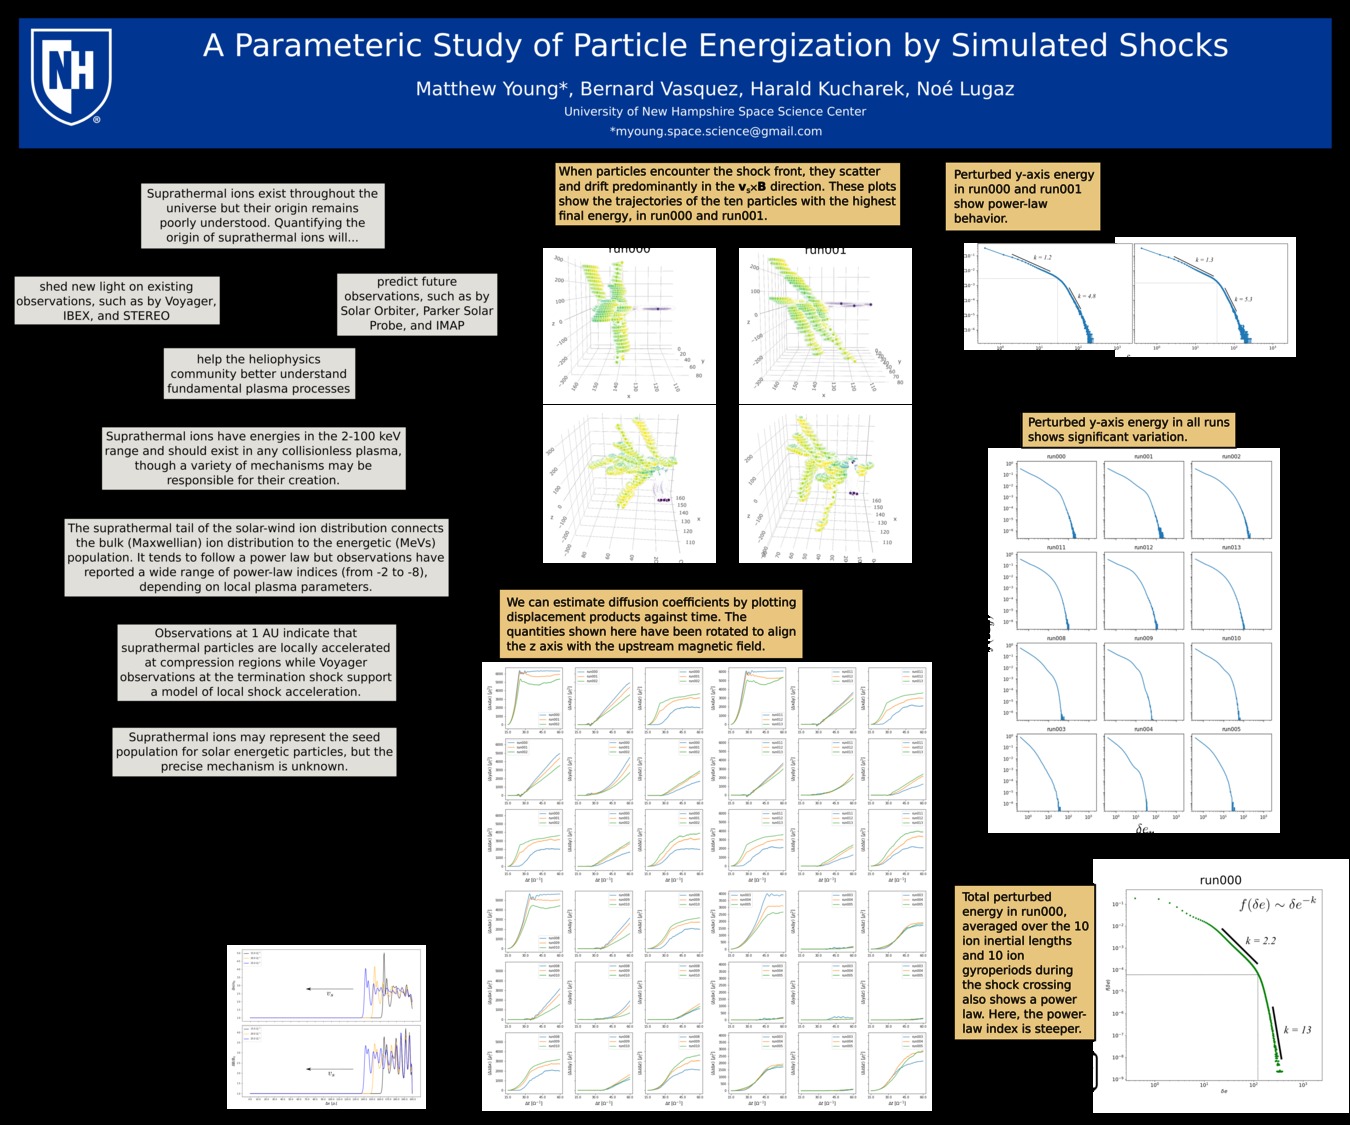 A Parameteric Study Of Particle Energization By Simulated Shocks by MatthewYoung